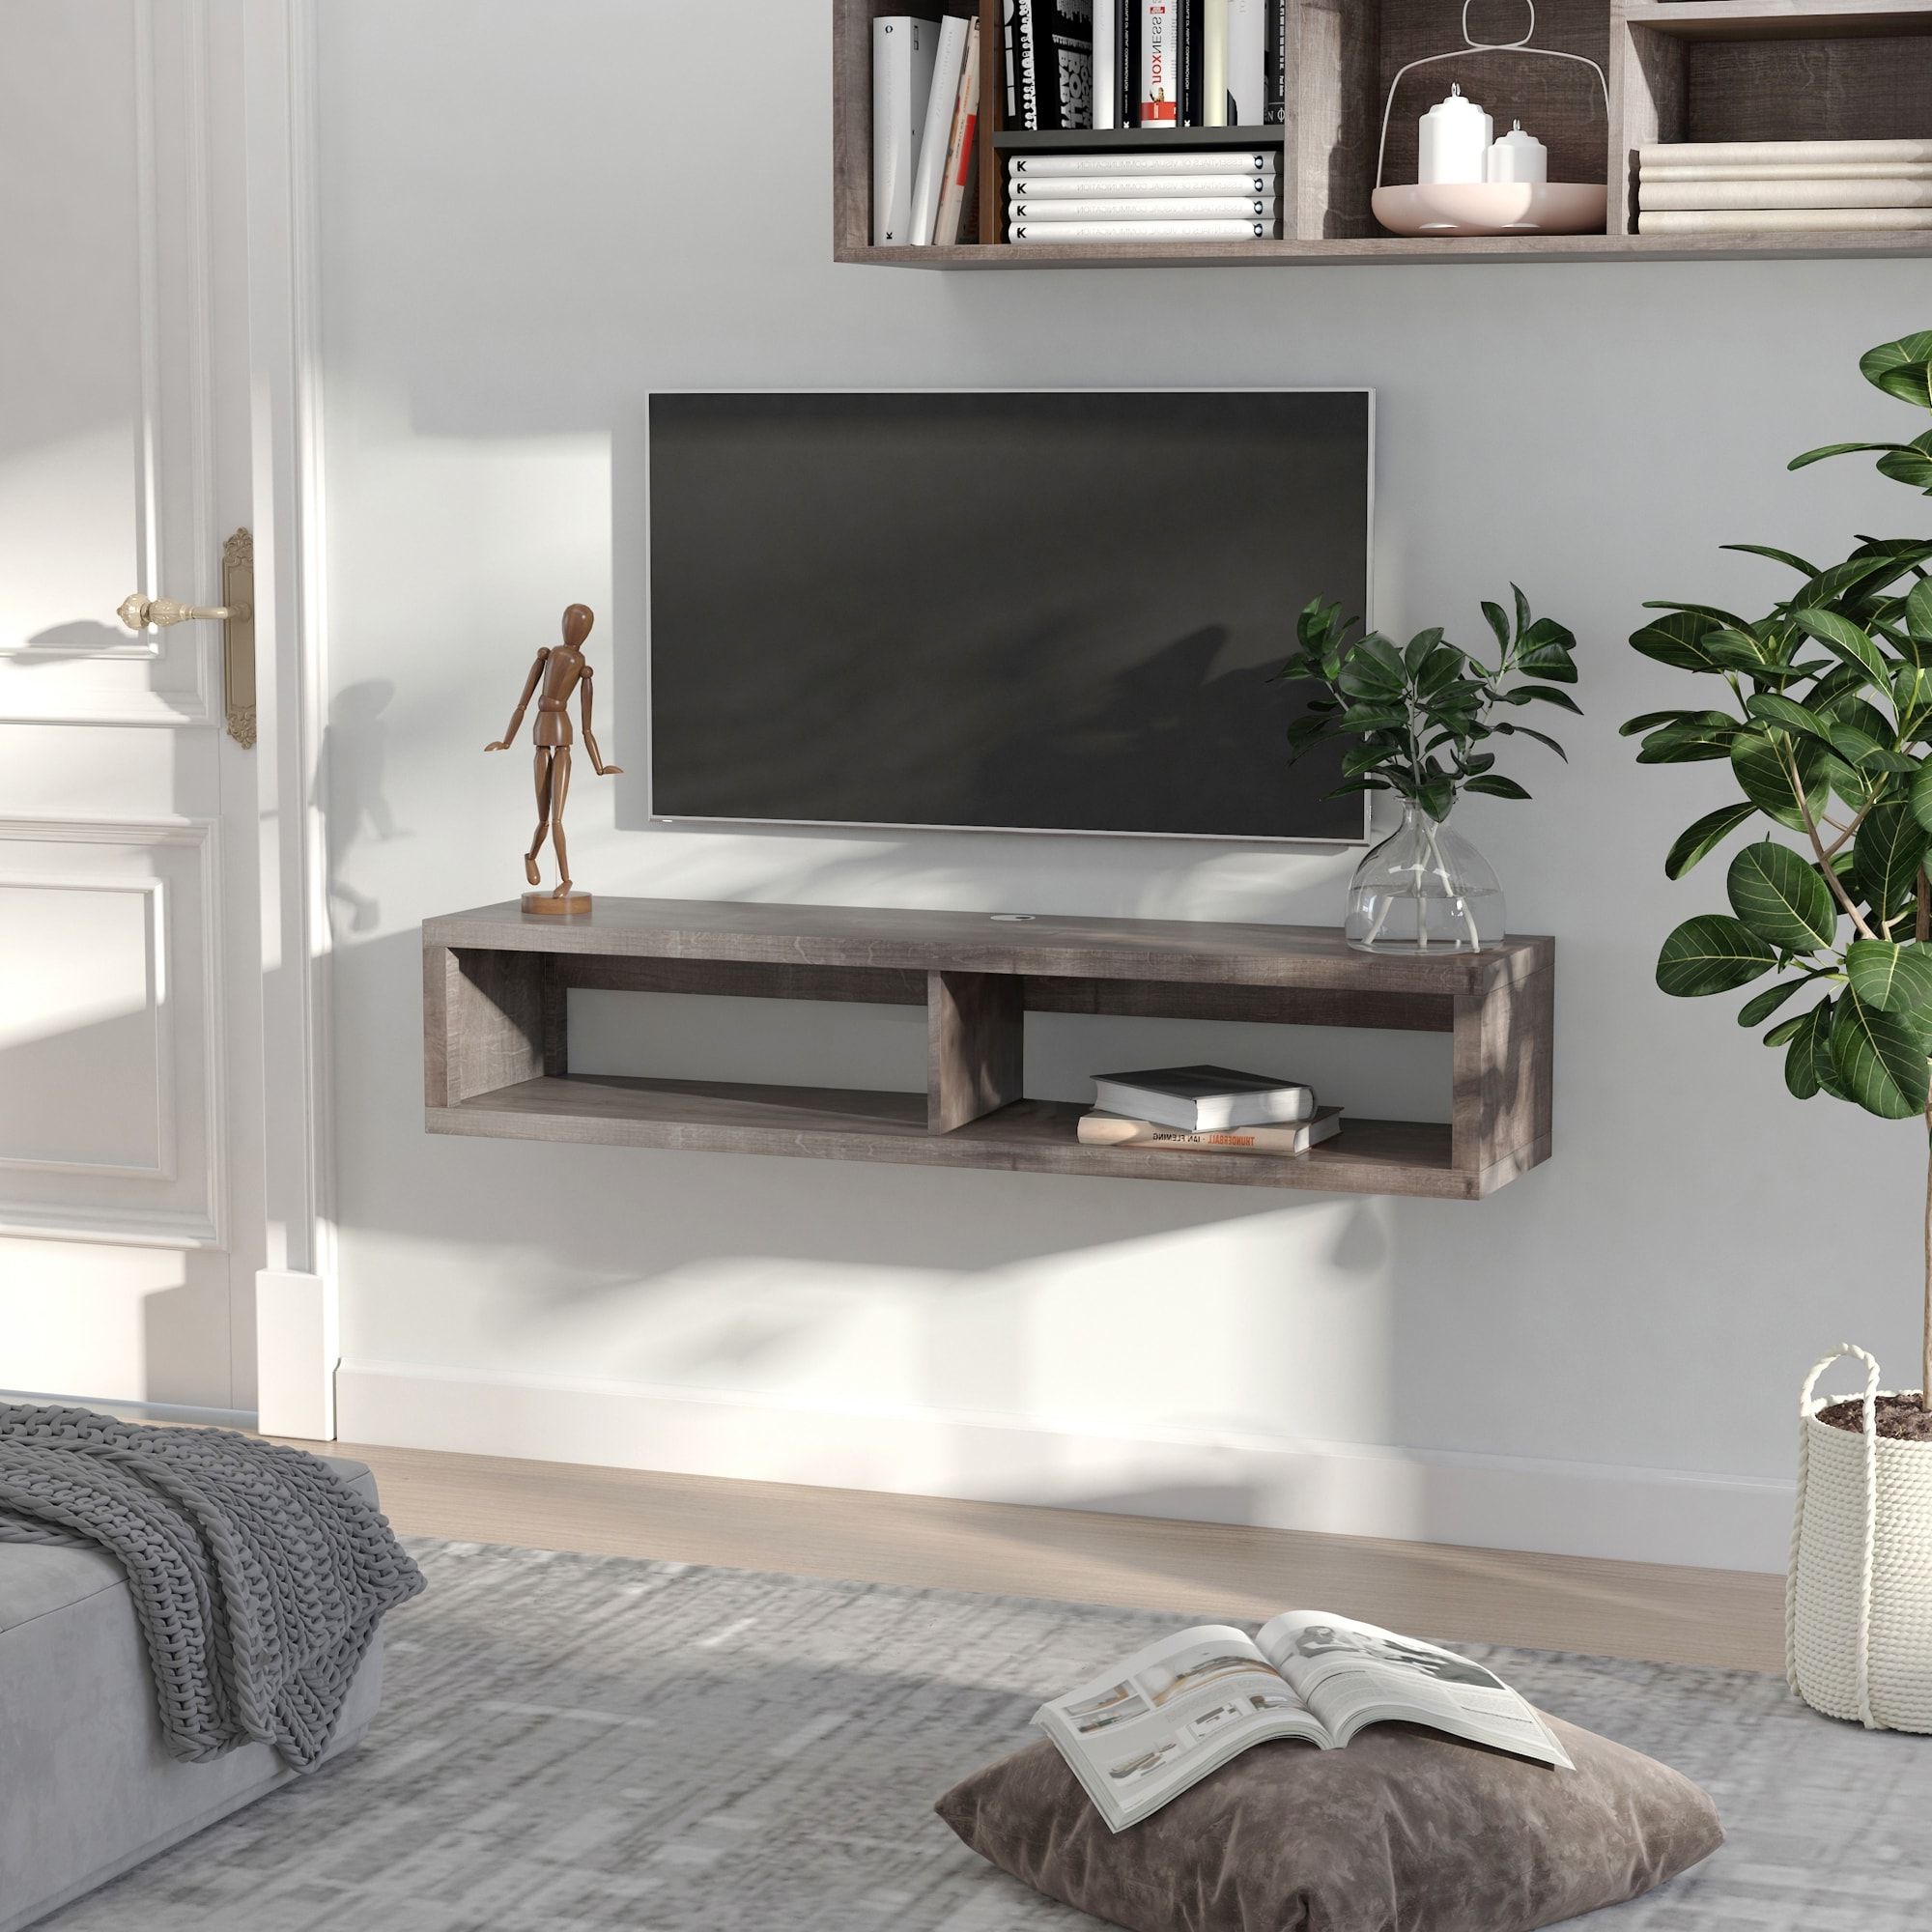 Homcom Wall Mounted Media Console, Floating Tv Stand Component Shelf, Entertainment  Center Unit, Dark Grey Wood Grain – On Sale – Bed Bath & Beyond – 32941209 Inside Wall Mounted Floating Tv Stands (Gallery 18 of 20)